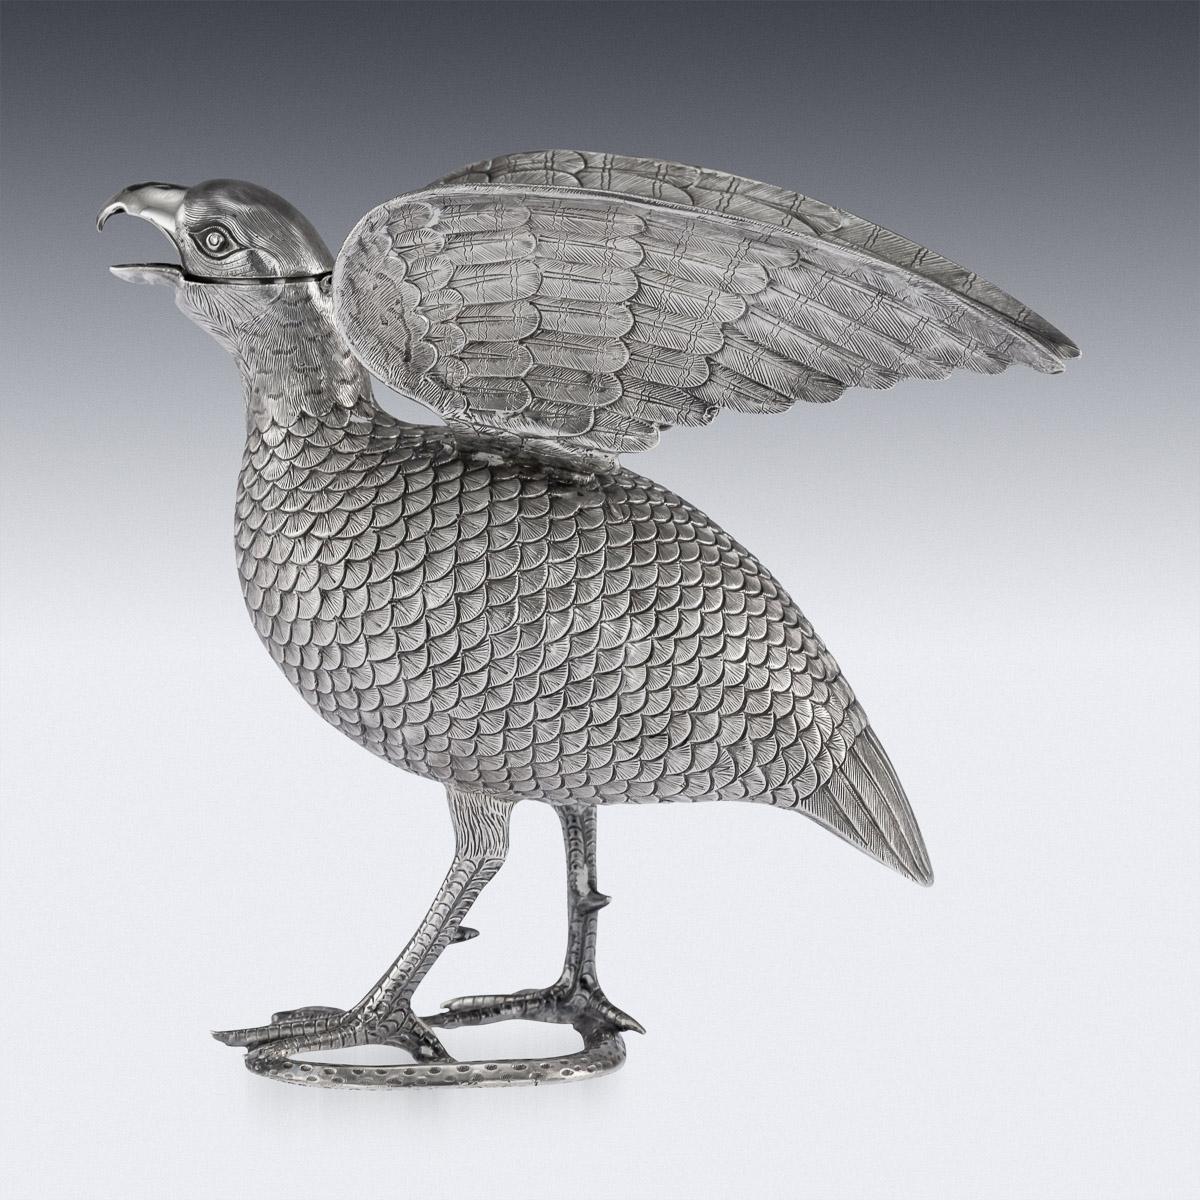 Antique 19th century exceptionally rare Indian Colonial solid silver cream jug modelled as a black francolin killing a snake, the feathers finely engraved, with a hinged head and spread wings. Hallmarked 'O.M Bhuj' under the snake for Oomersi Mawji,